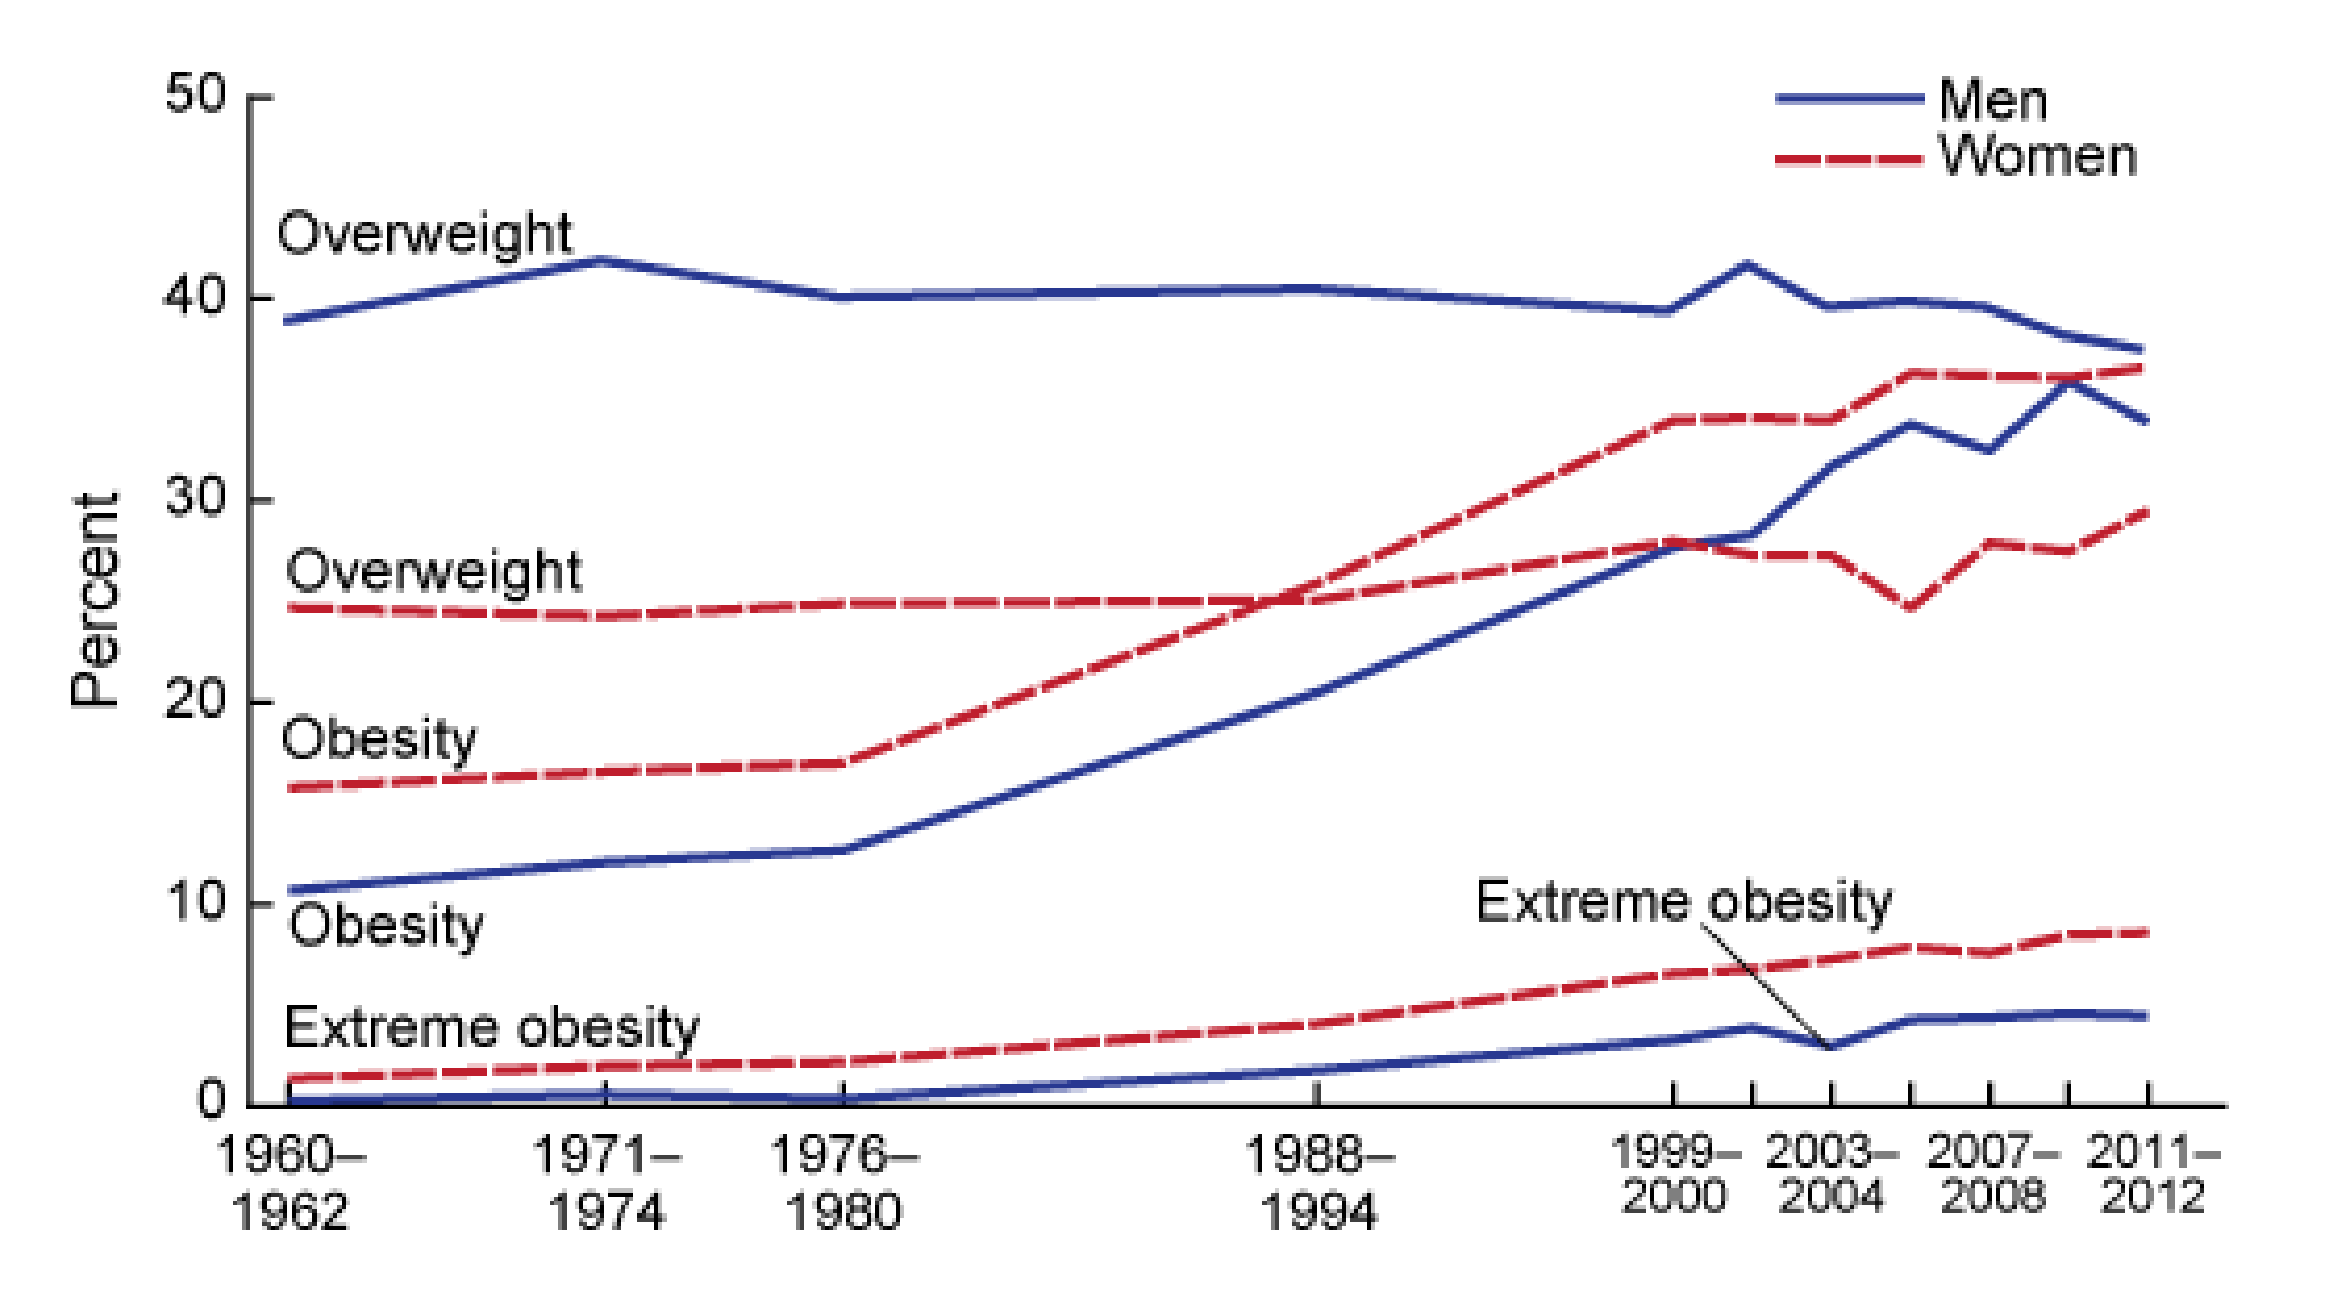 A graph showing obesity of men and women from 1960 to 2012.